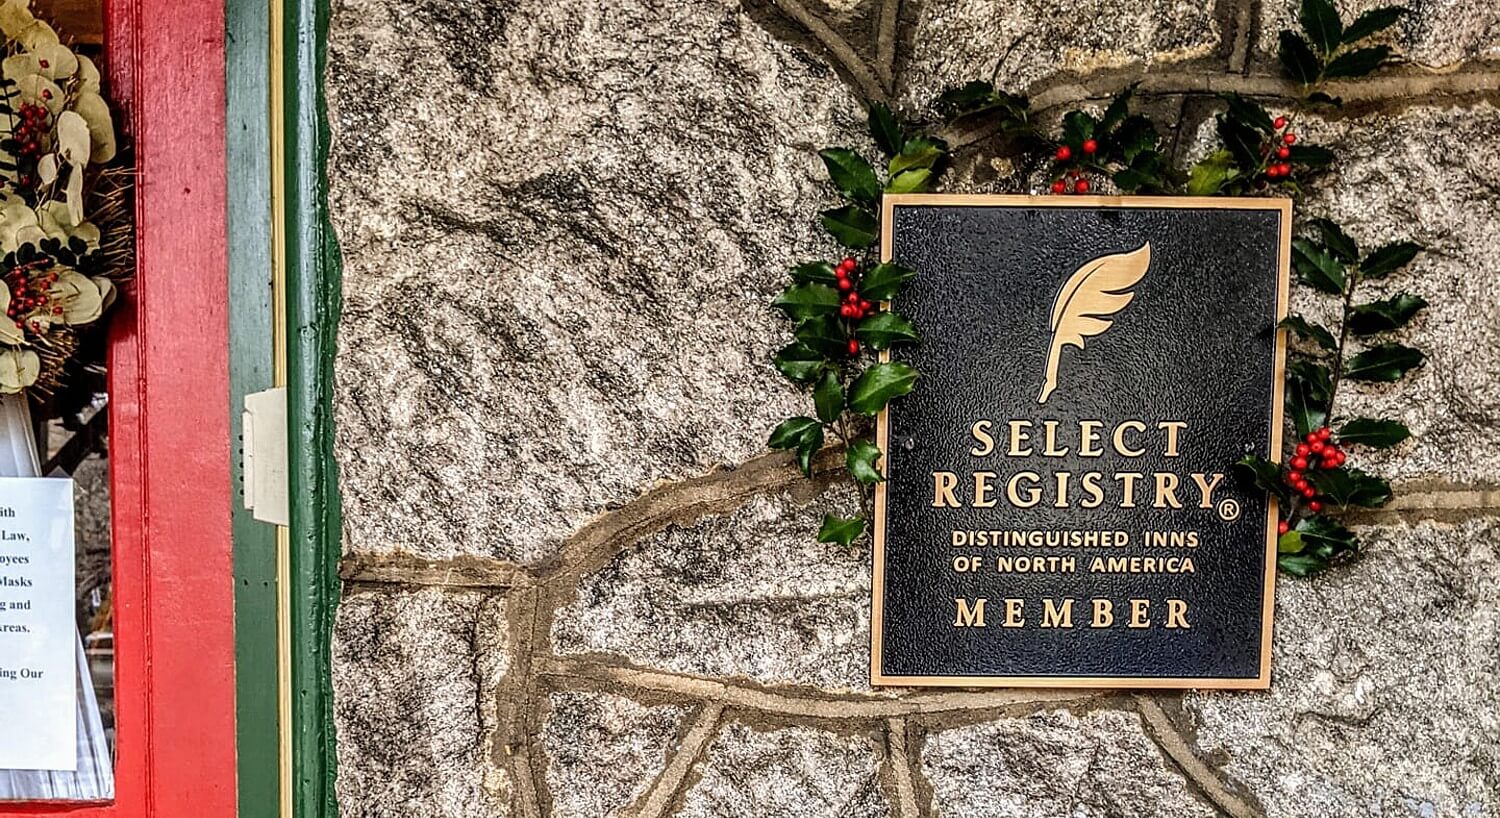 Black sign with gold text and logo hanging on a stone wall outside a green and red door